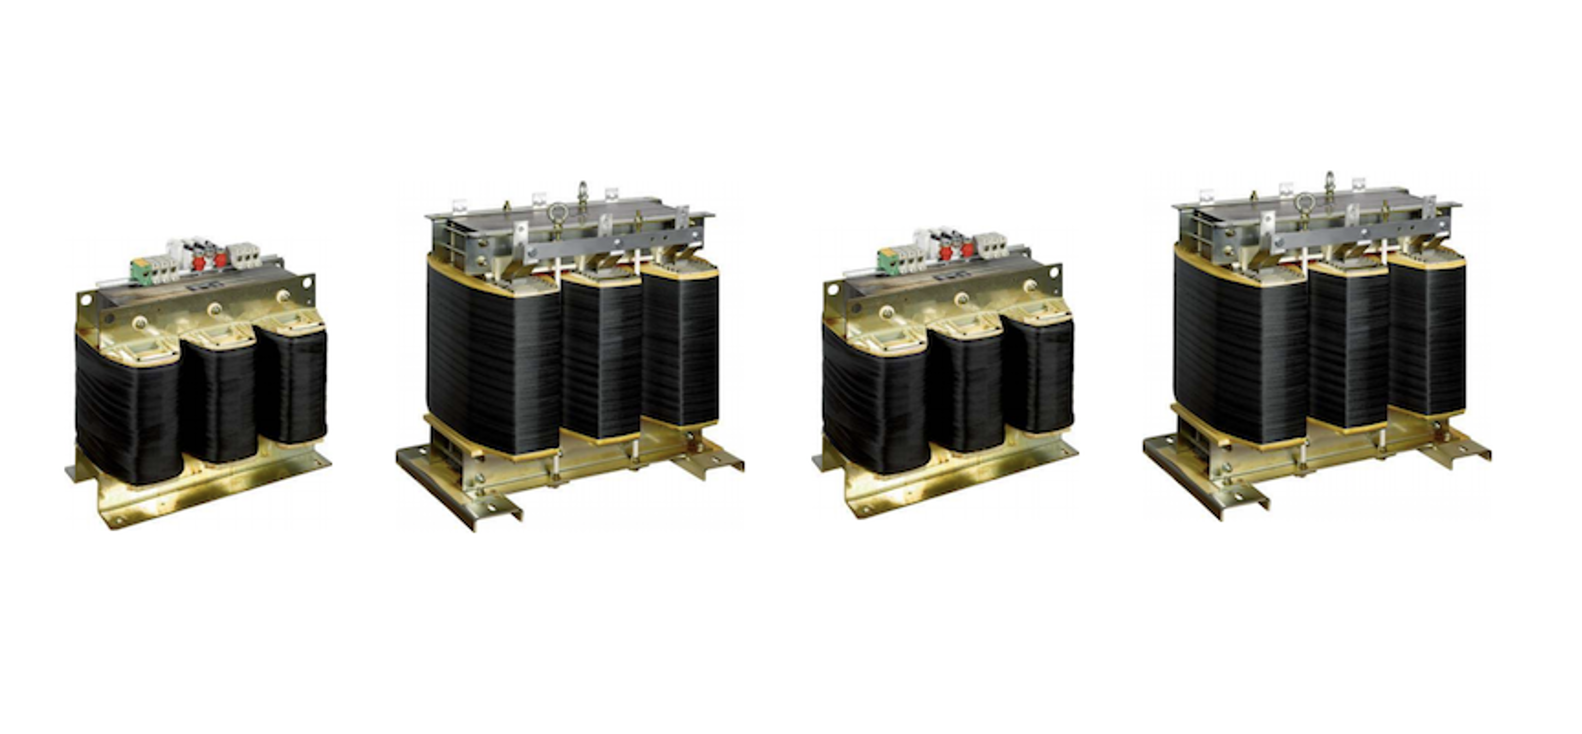 Three phase transformers for renewable energy applications image.